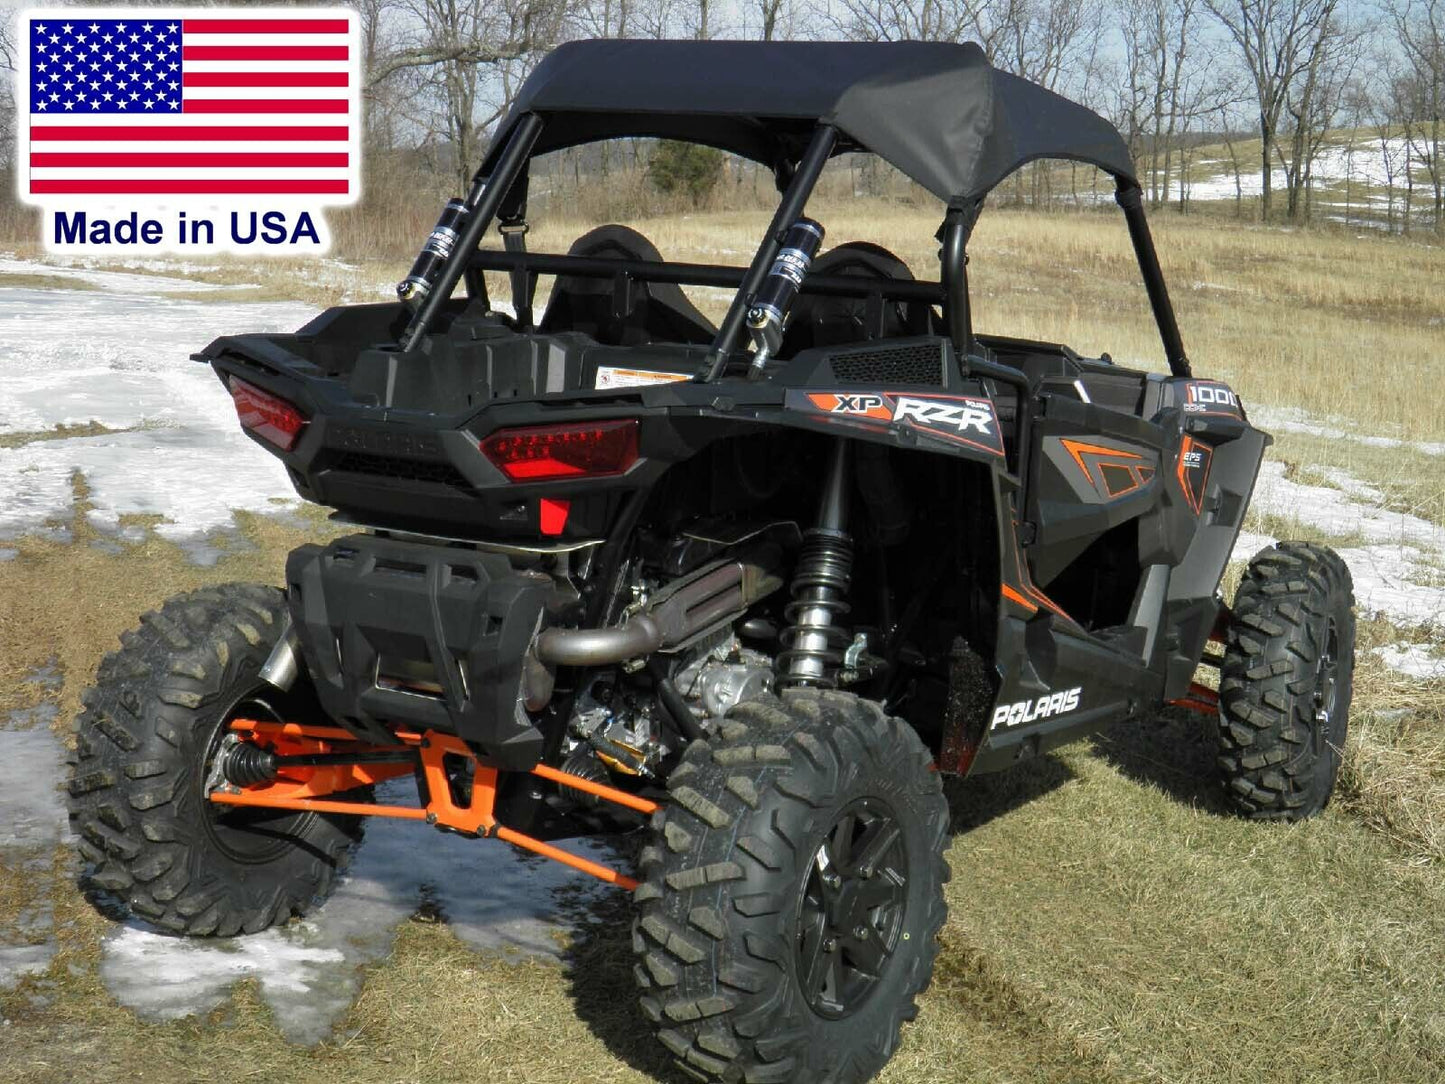 ROOF for Polaris RZR 1000 - Soft Material - Top - Withstands Highway Speeds